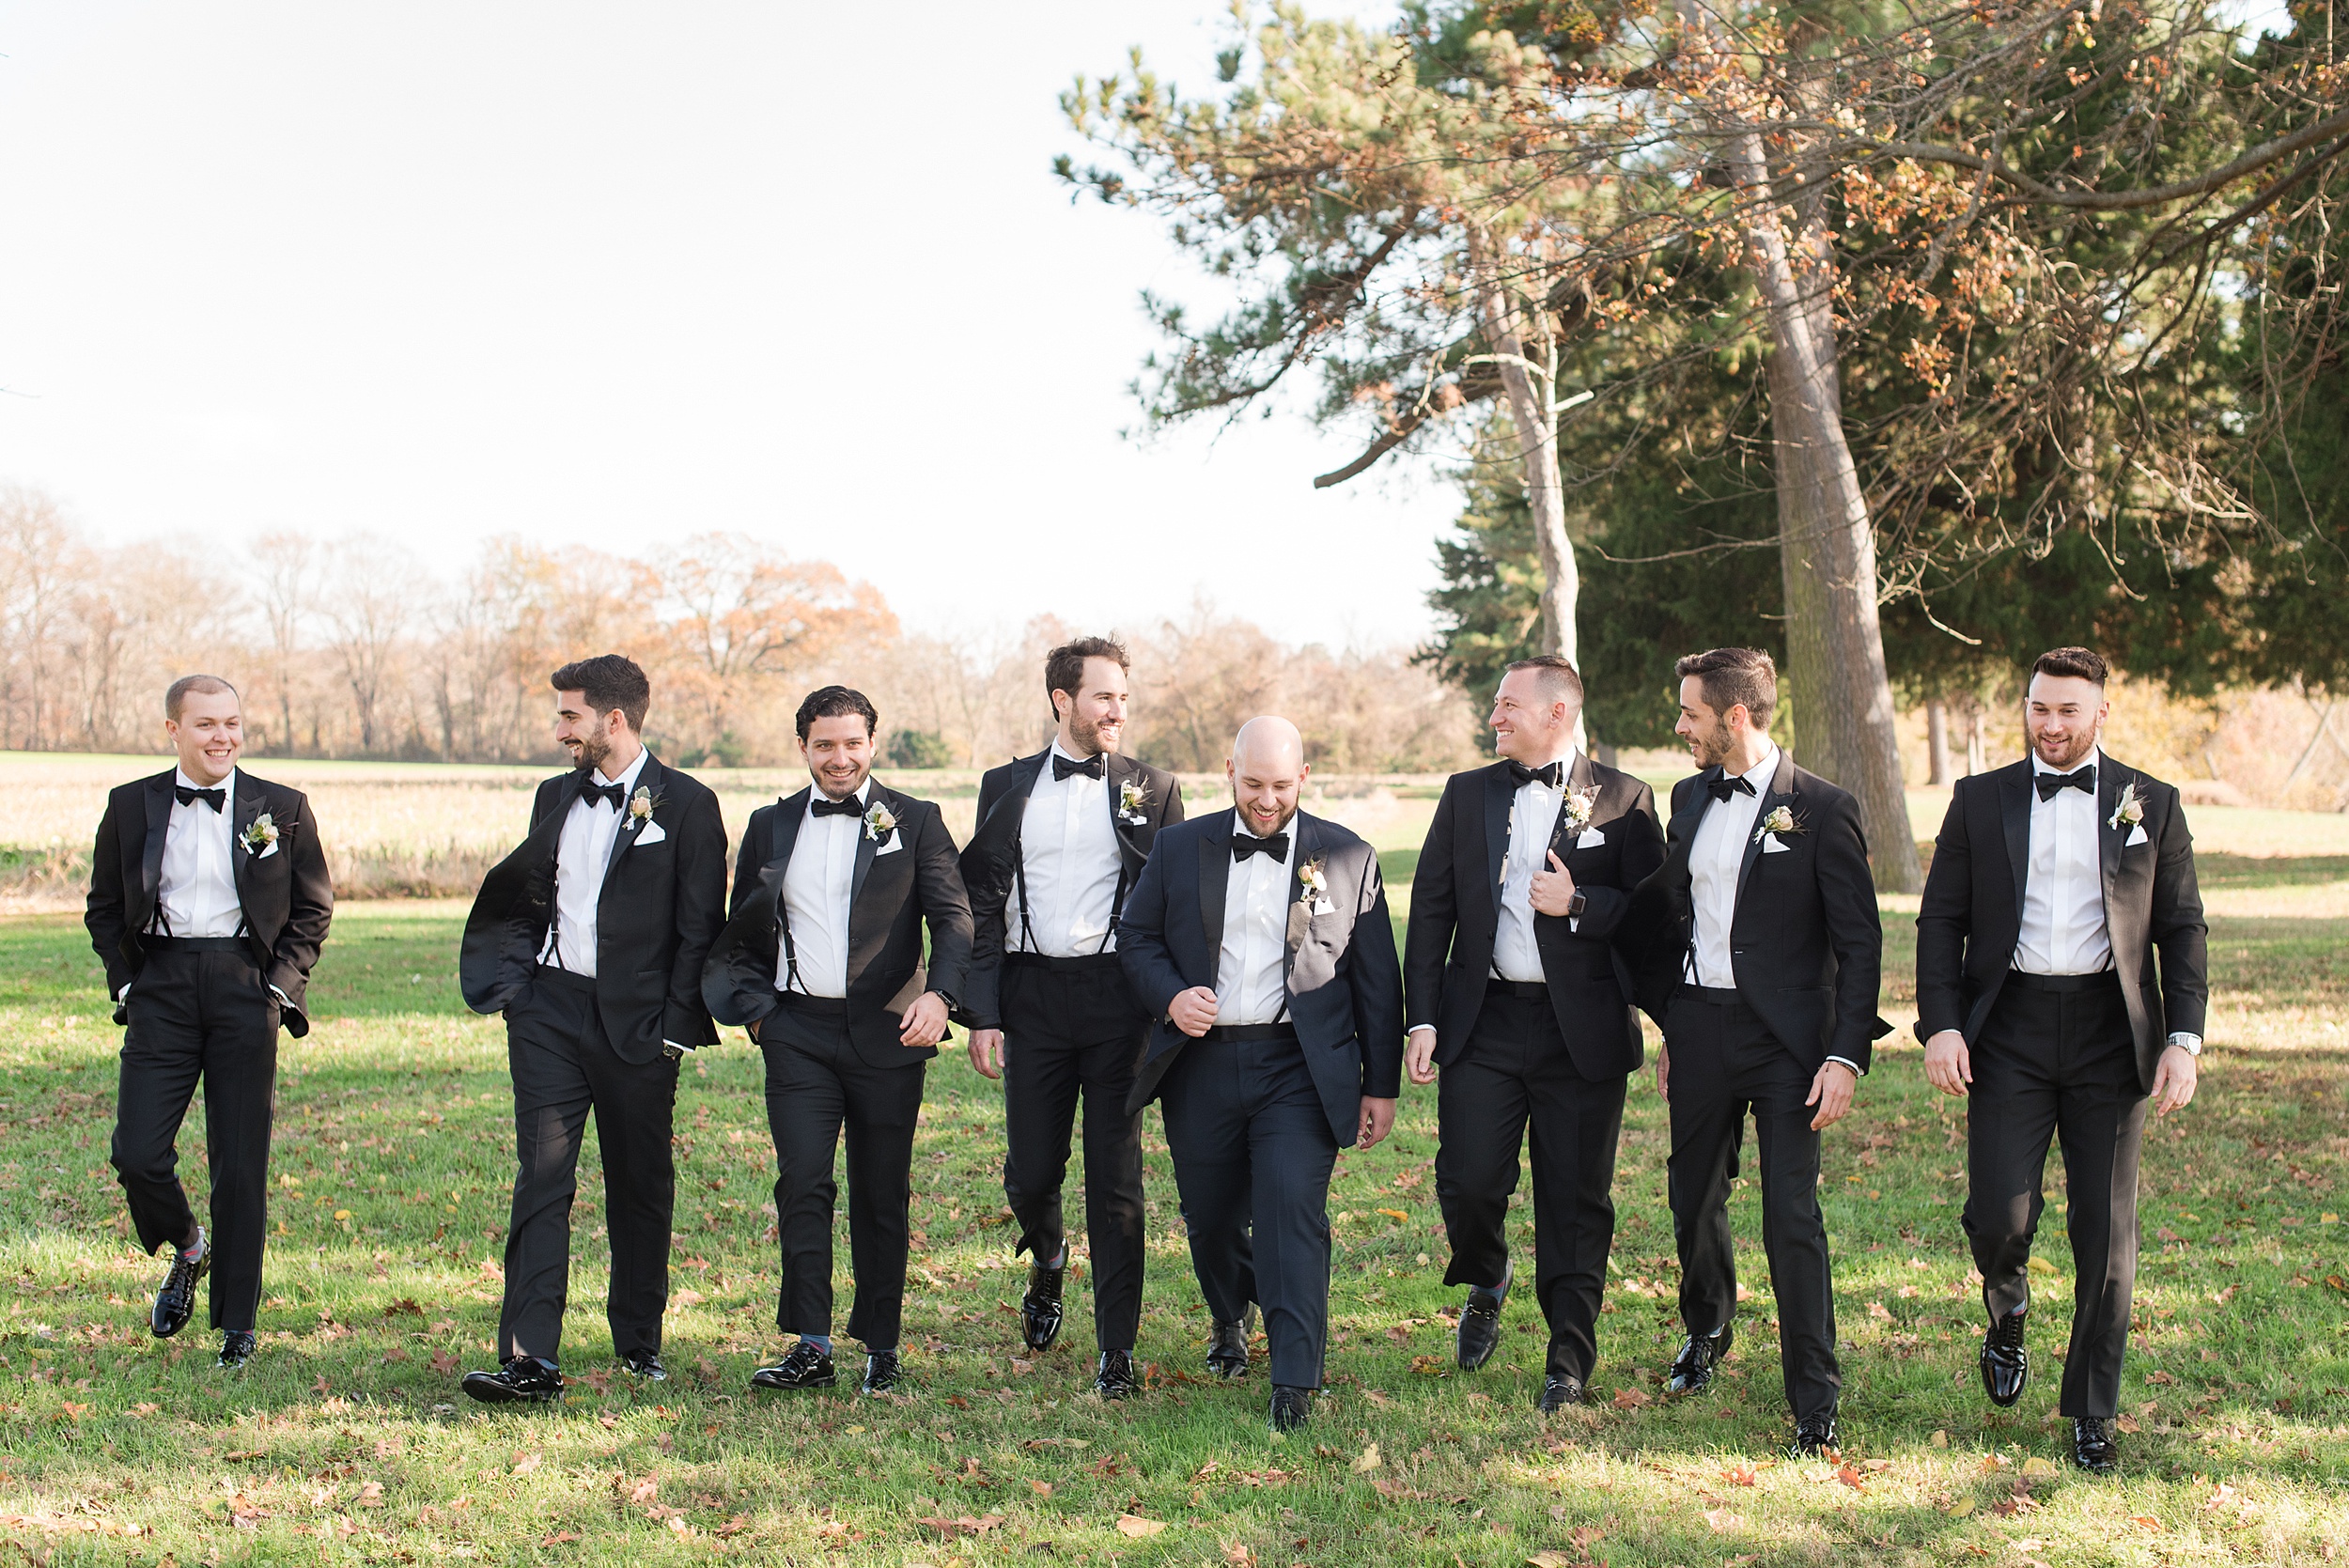 A groom in a black tux walks through a lawn with his many groomsmen in matching tuxes